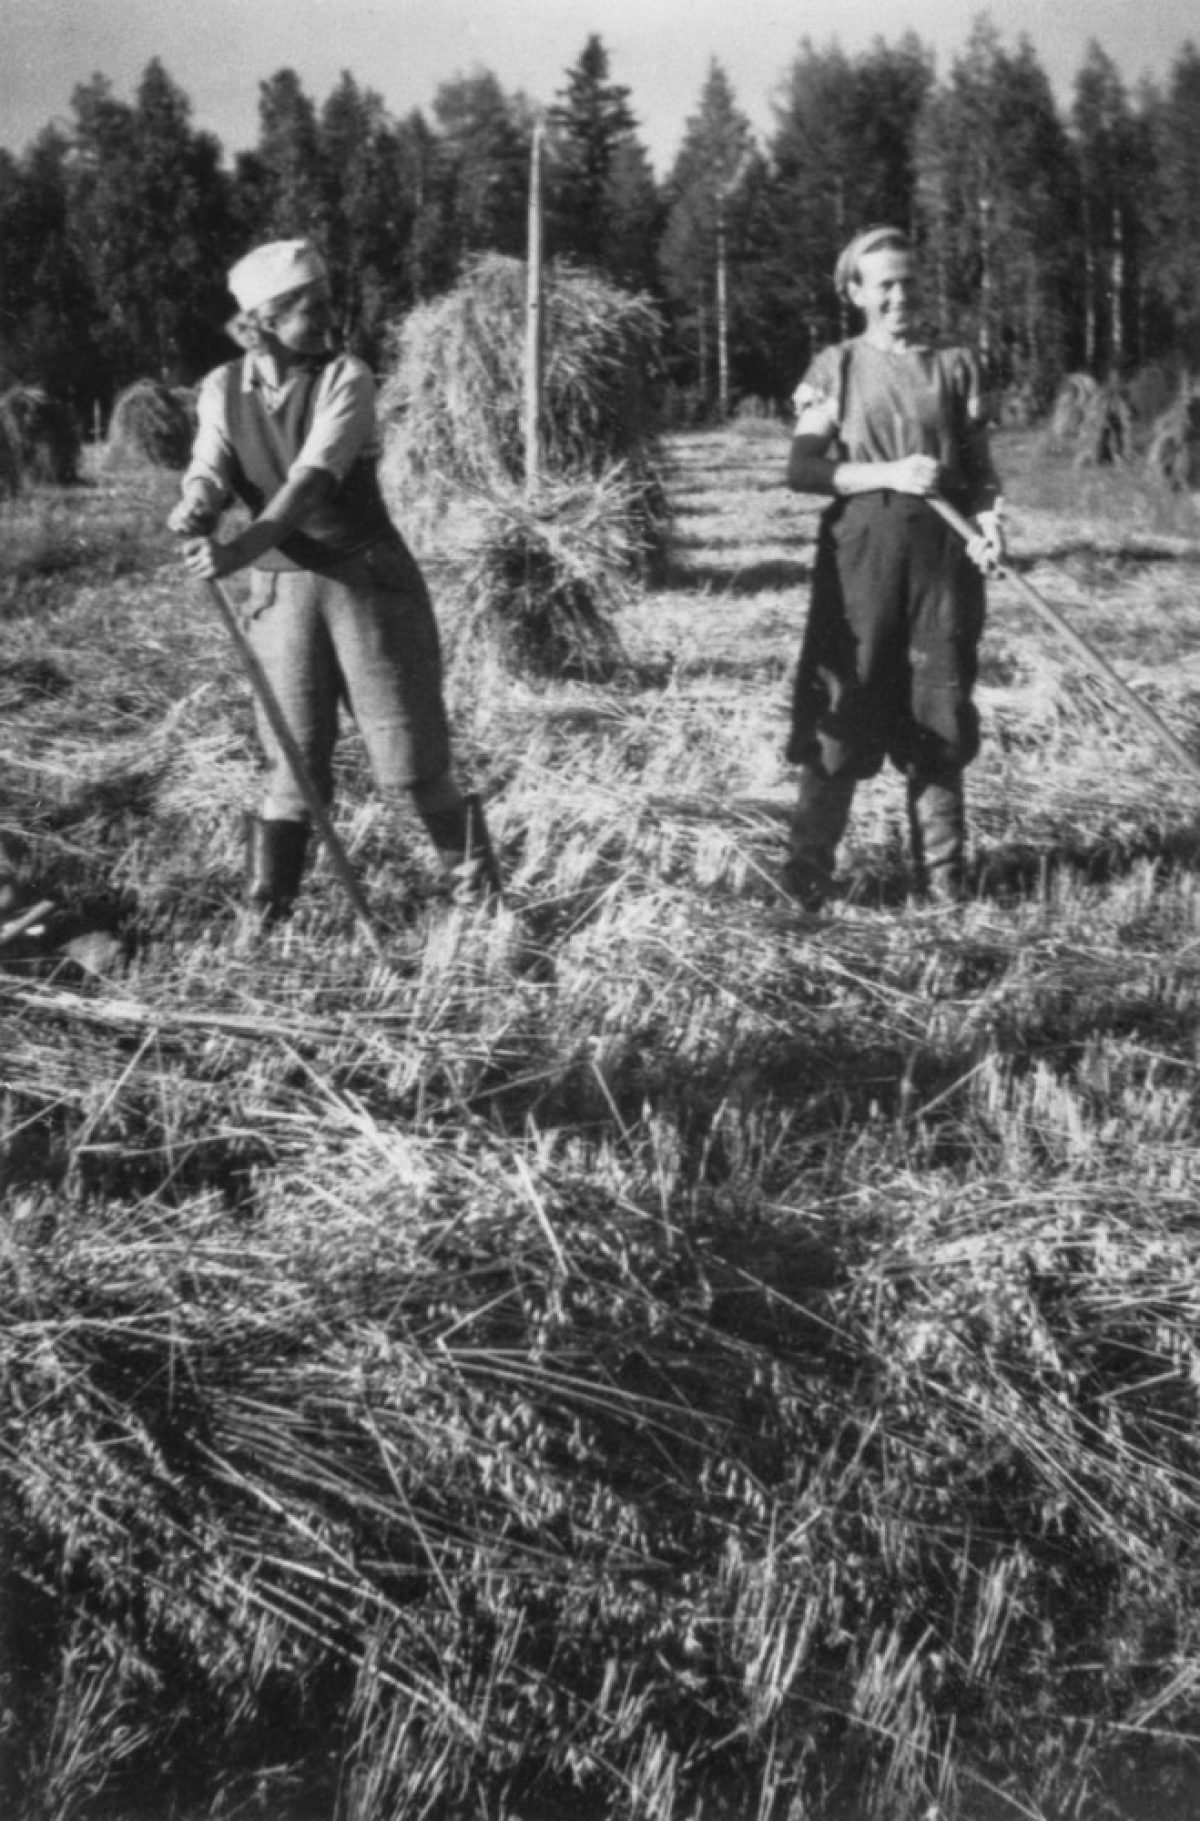 Workers stationed at Aurala Manor in Hollola in the Manor’s oat field 1944 (mirror image of the original). Photo: Kirsti Järvinen / Picture Collections of Finnish Heritage Agency